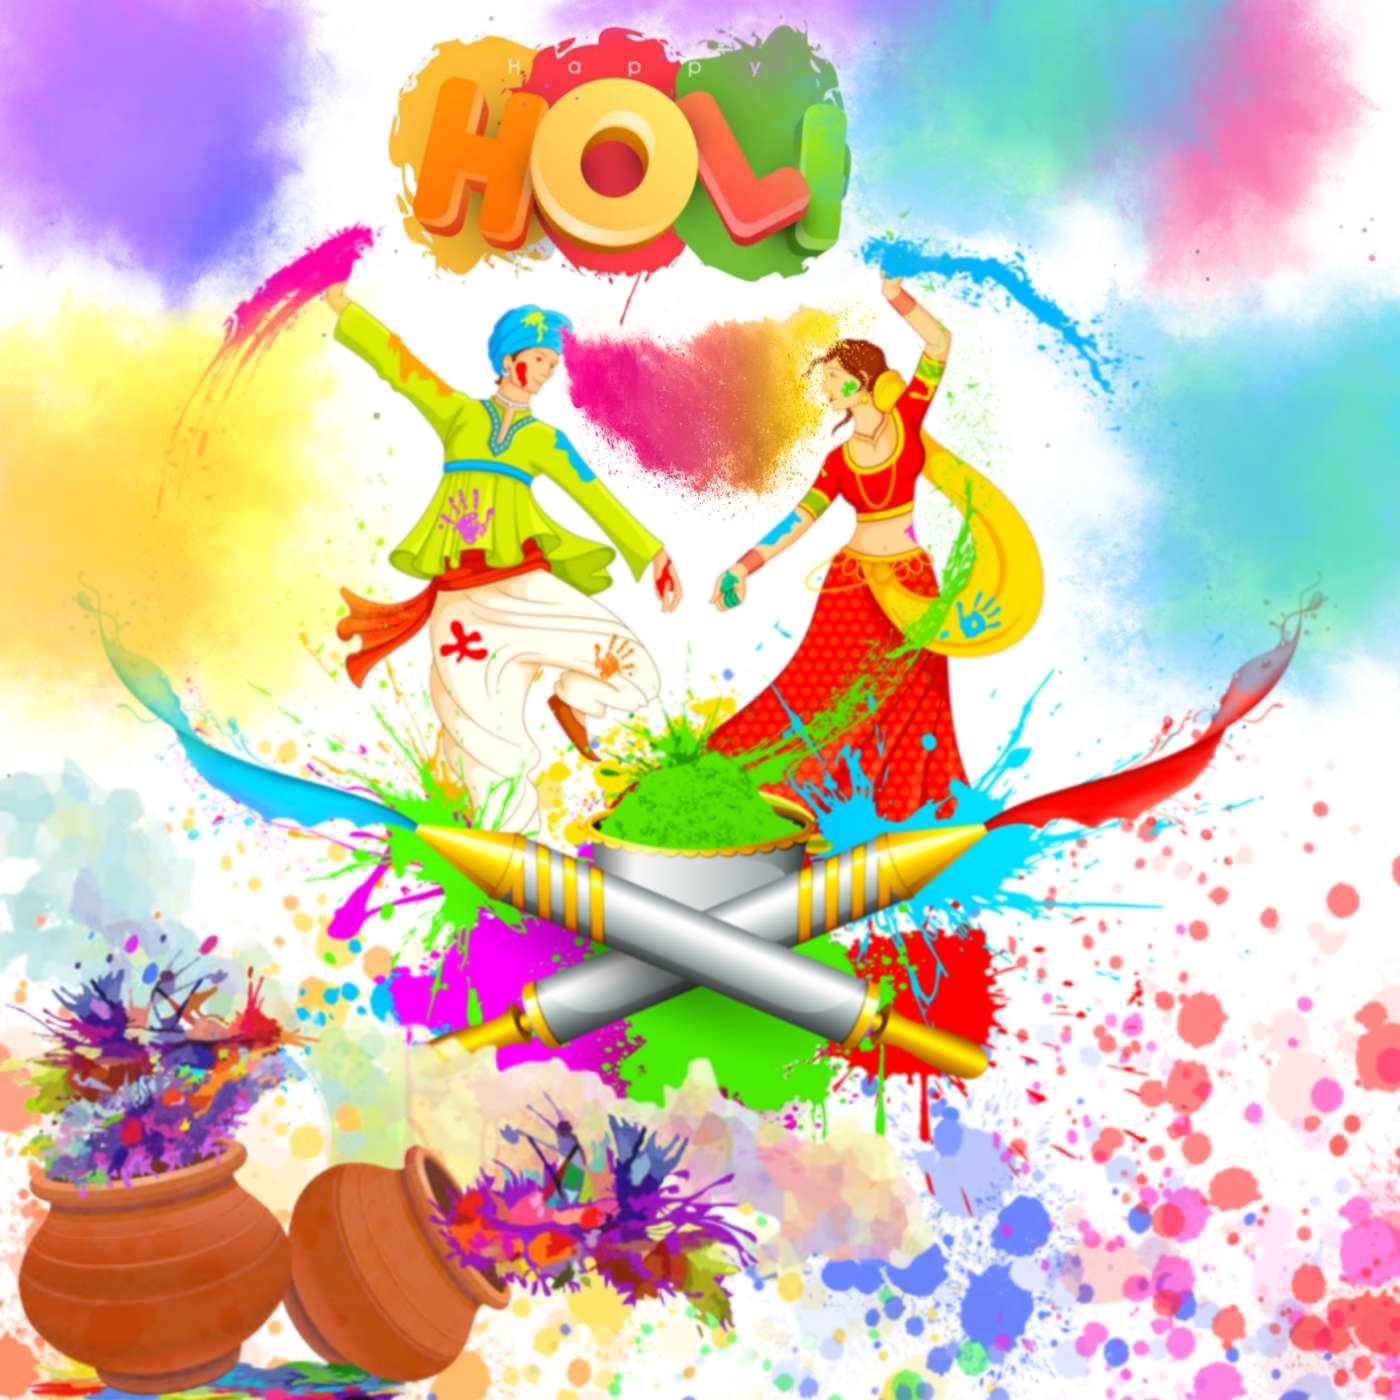 Happy Holi Images 2022 Download